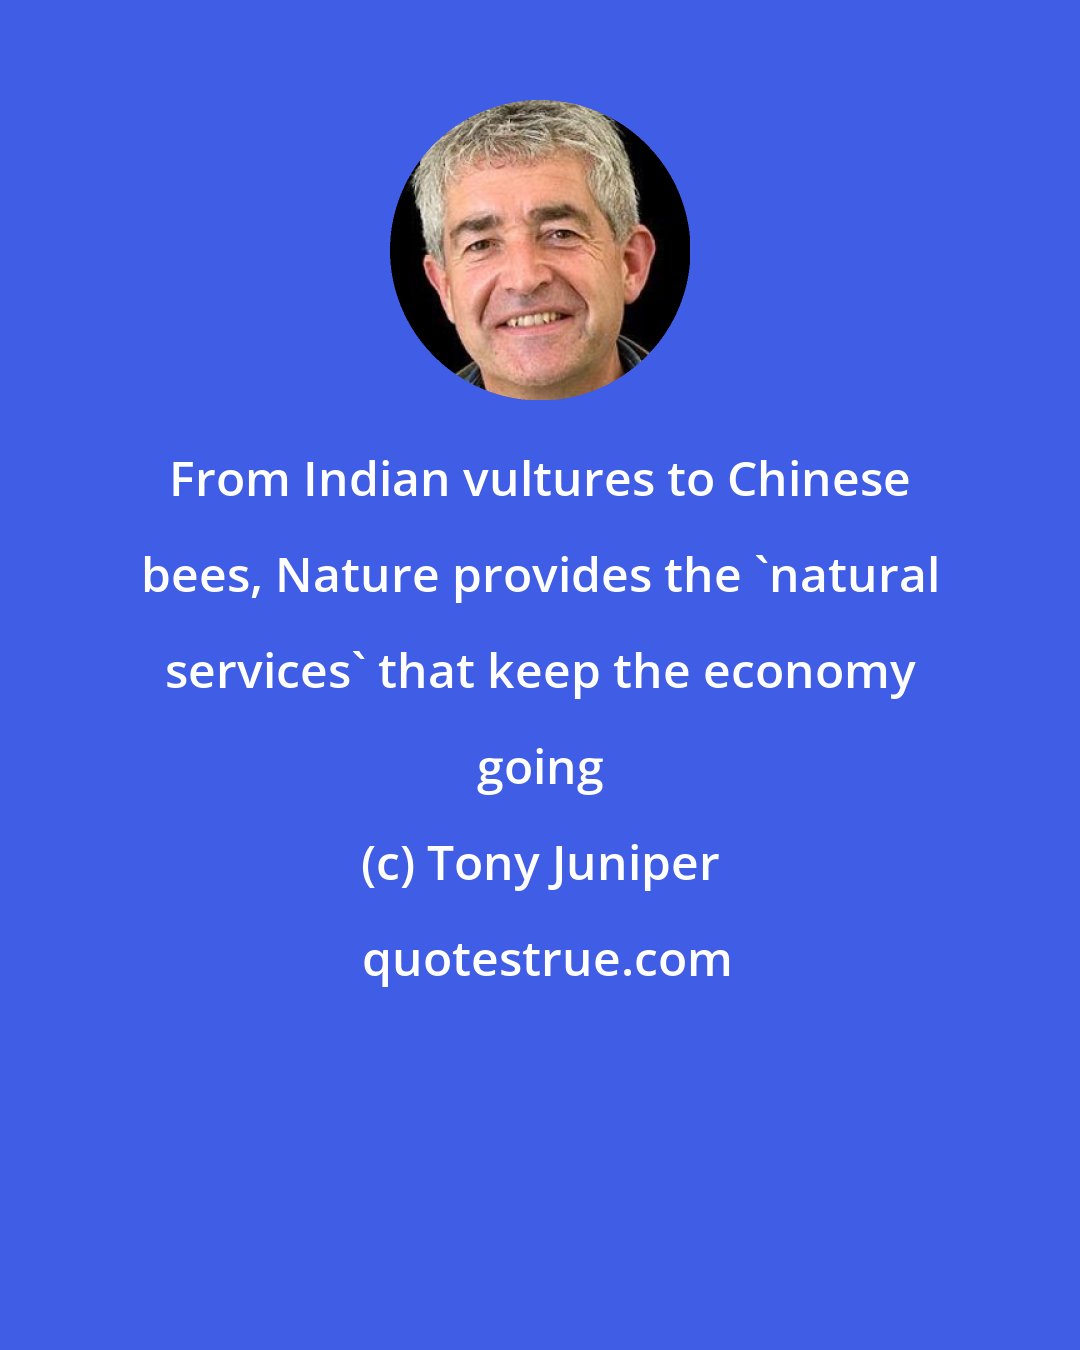 Tony Juniper: From Indian vultures to Chinese bees, Nature provides the 'natural services' that keep the economy going